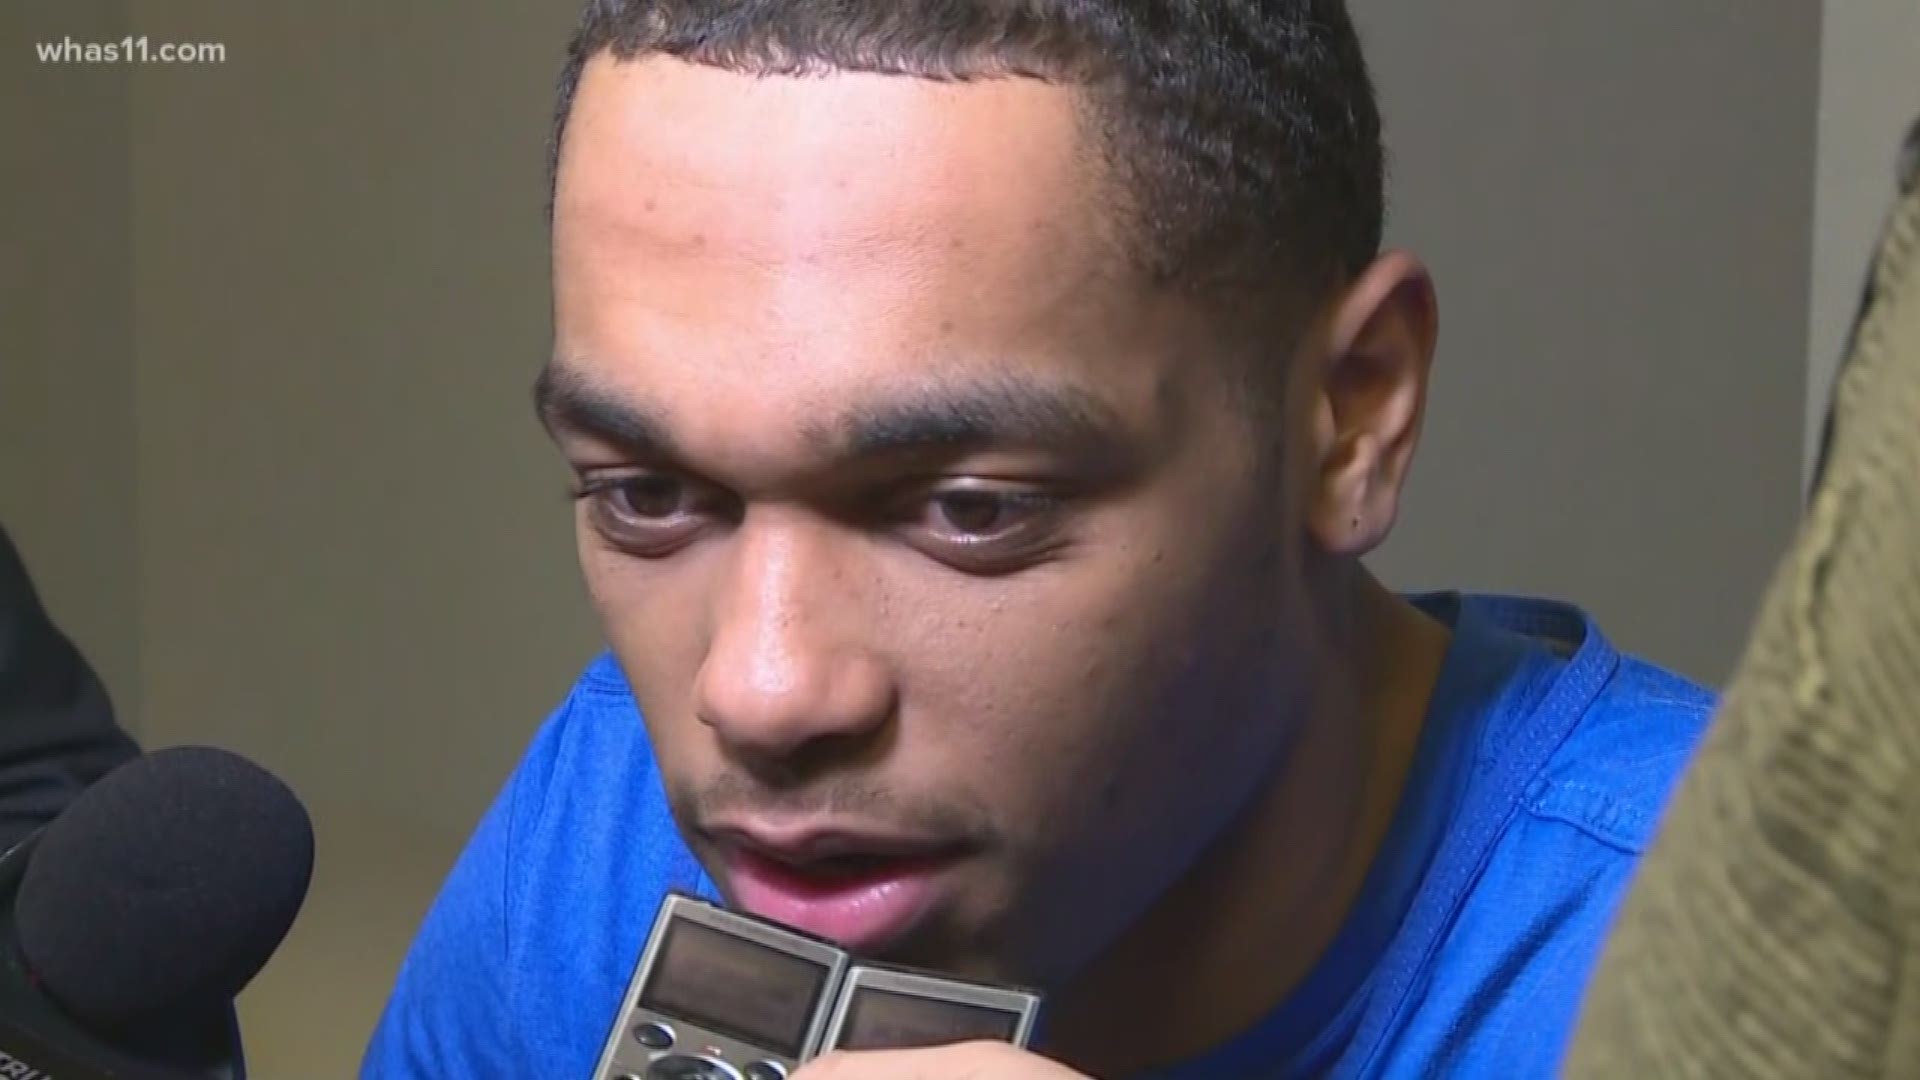 PJ Washington sent fans into a frenzy when he posted a video walking without a cast, but he told reporters in Kansas City he still does not know if he's playing Friday.